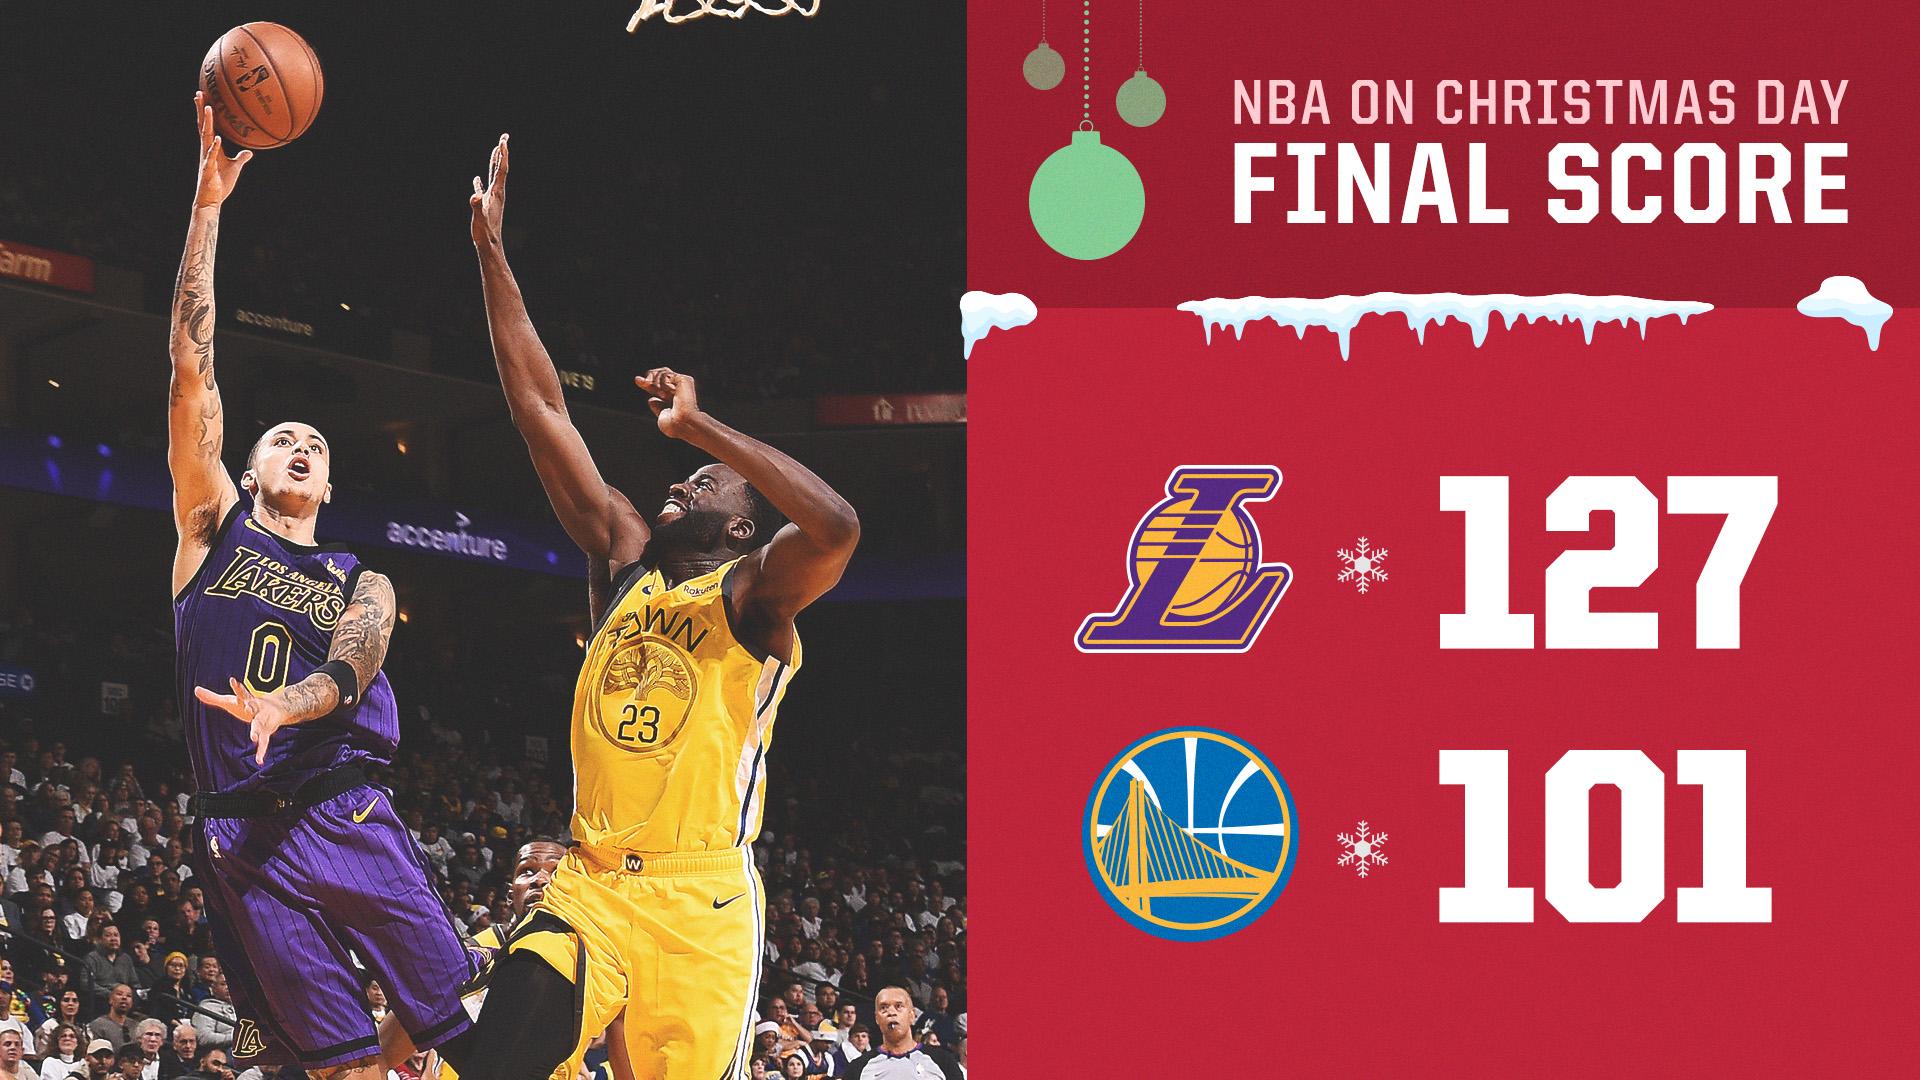 Twitter: "LOS ANGELES WINS! Lakers beat the Warriors in Oakland for the first time since December 2012. https://t.co/C6QaHXYmWE" / Twitter